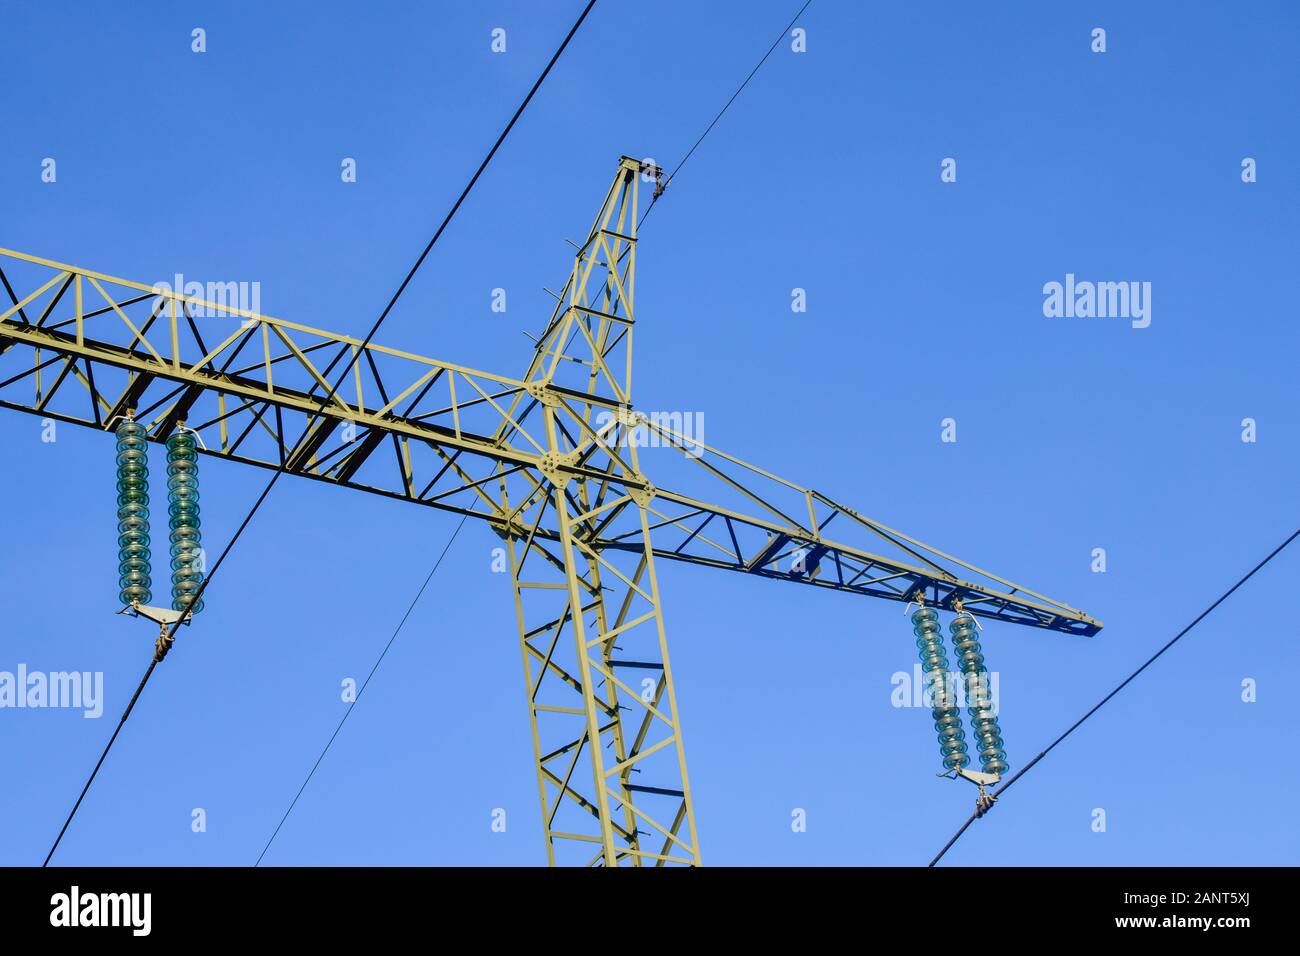 this is a Power Line Stock Photo